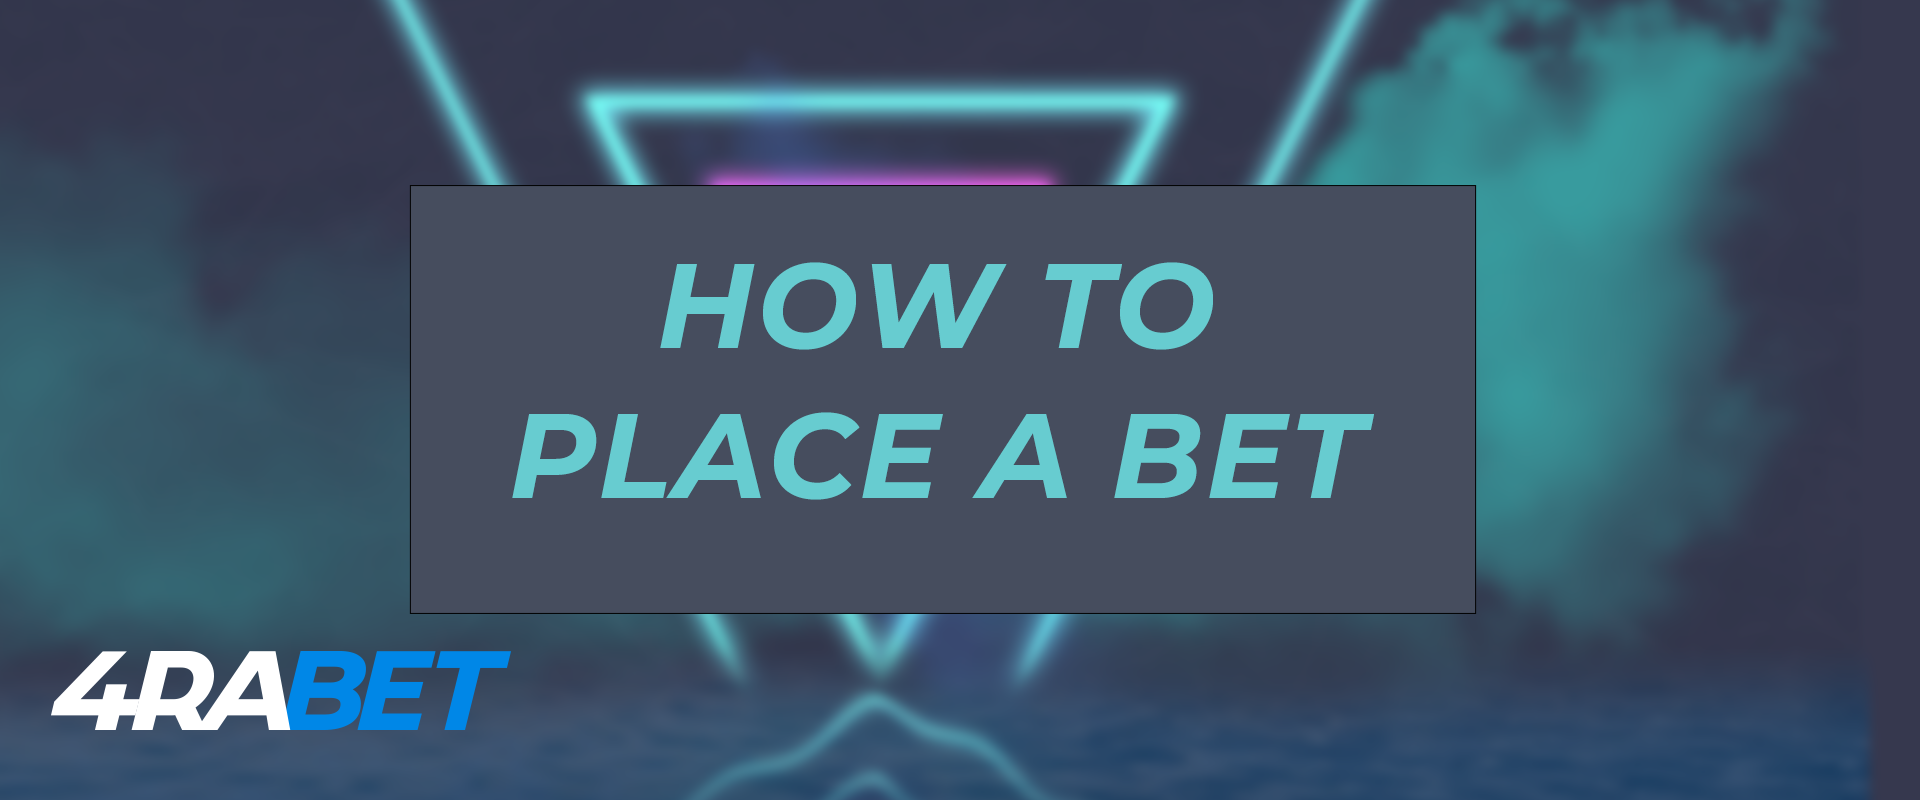 Useful information about how to place a bet on the esport on the 4rabet.